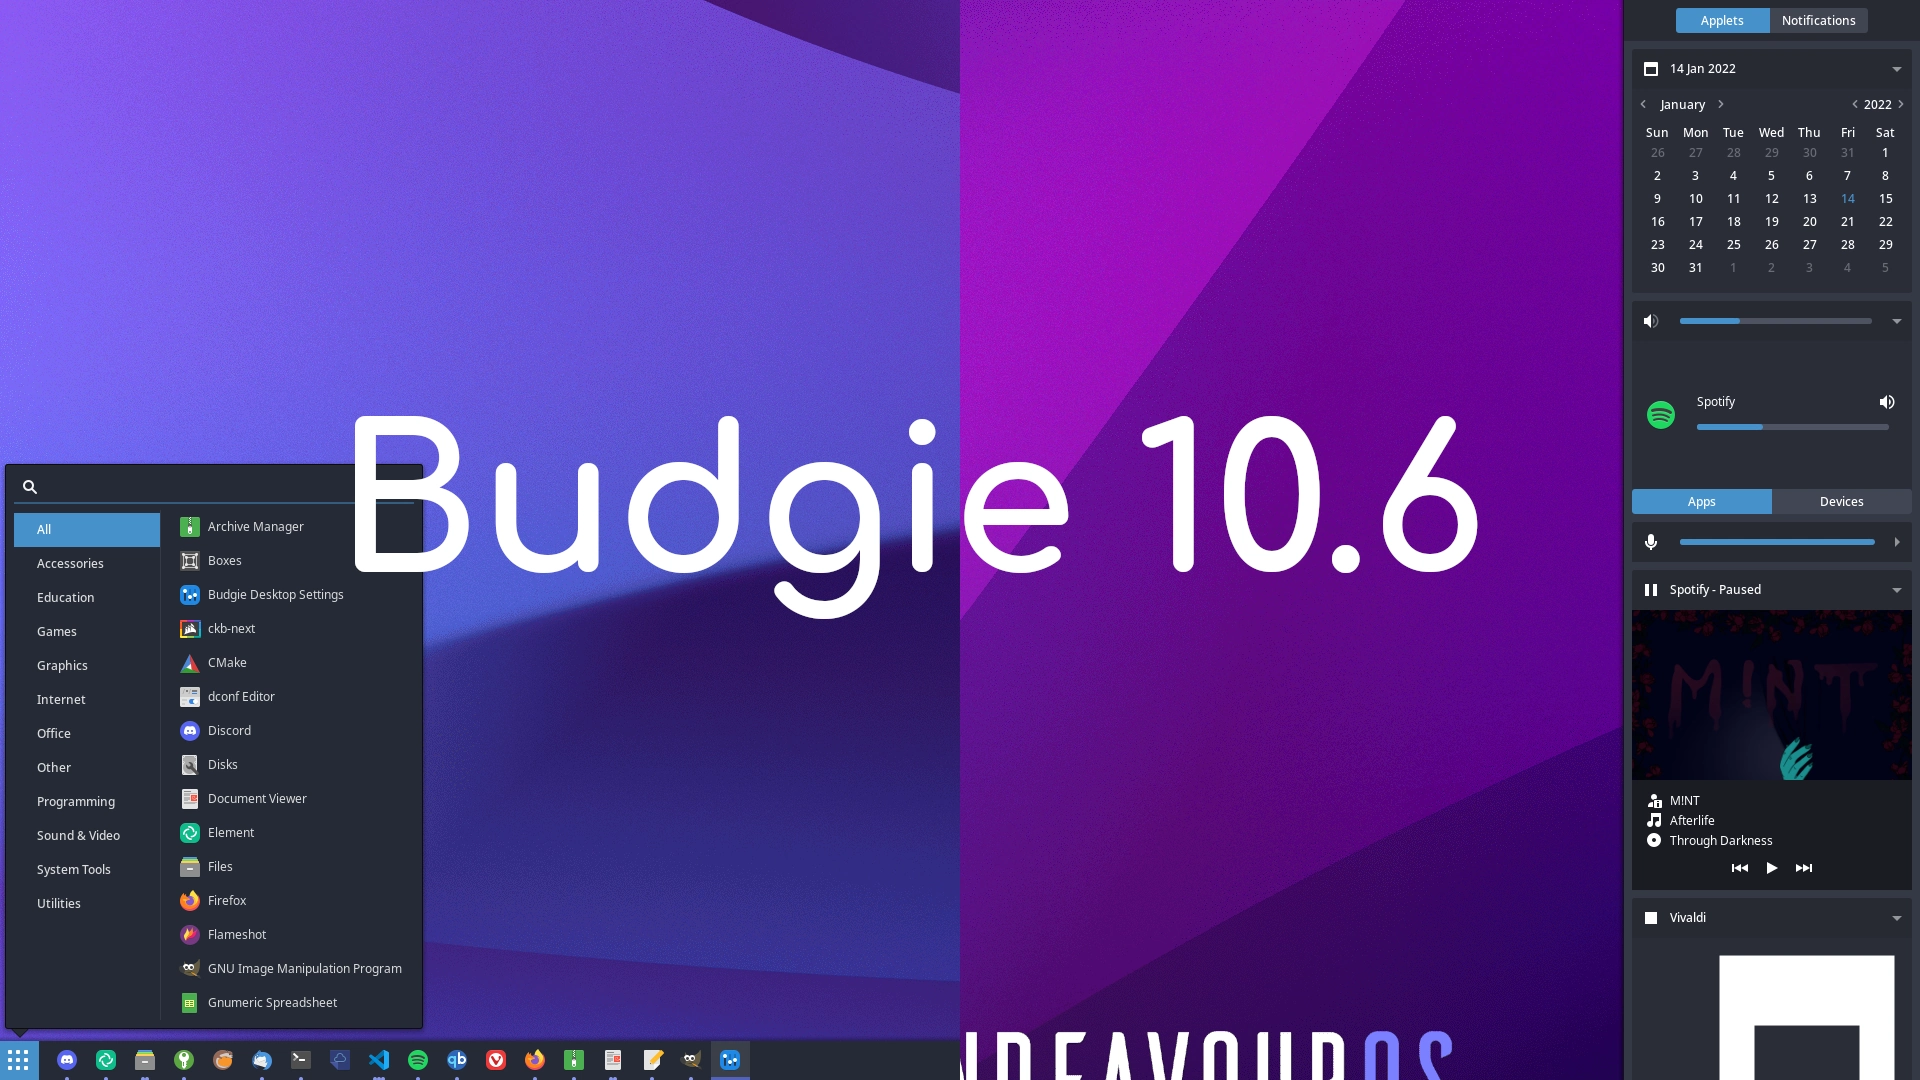 Budgie 10.6 Desktop Environment Improves Theme and Panel, Revamps Notification System